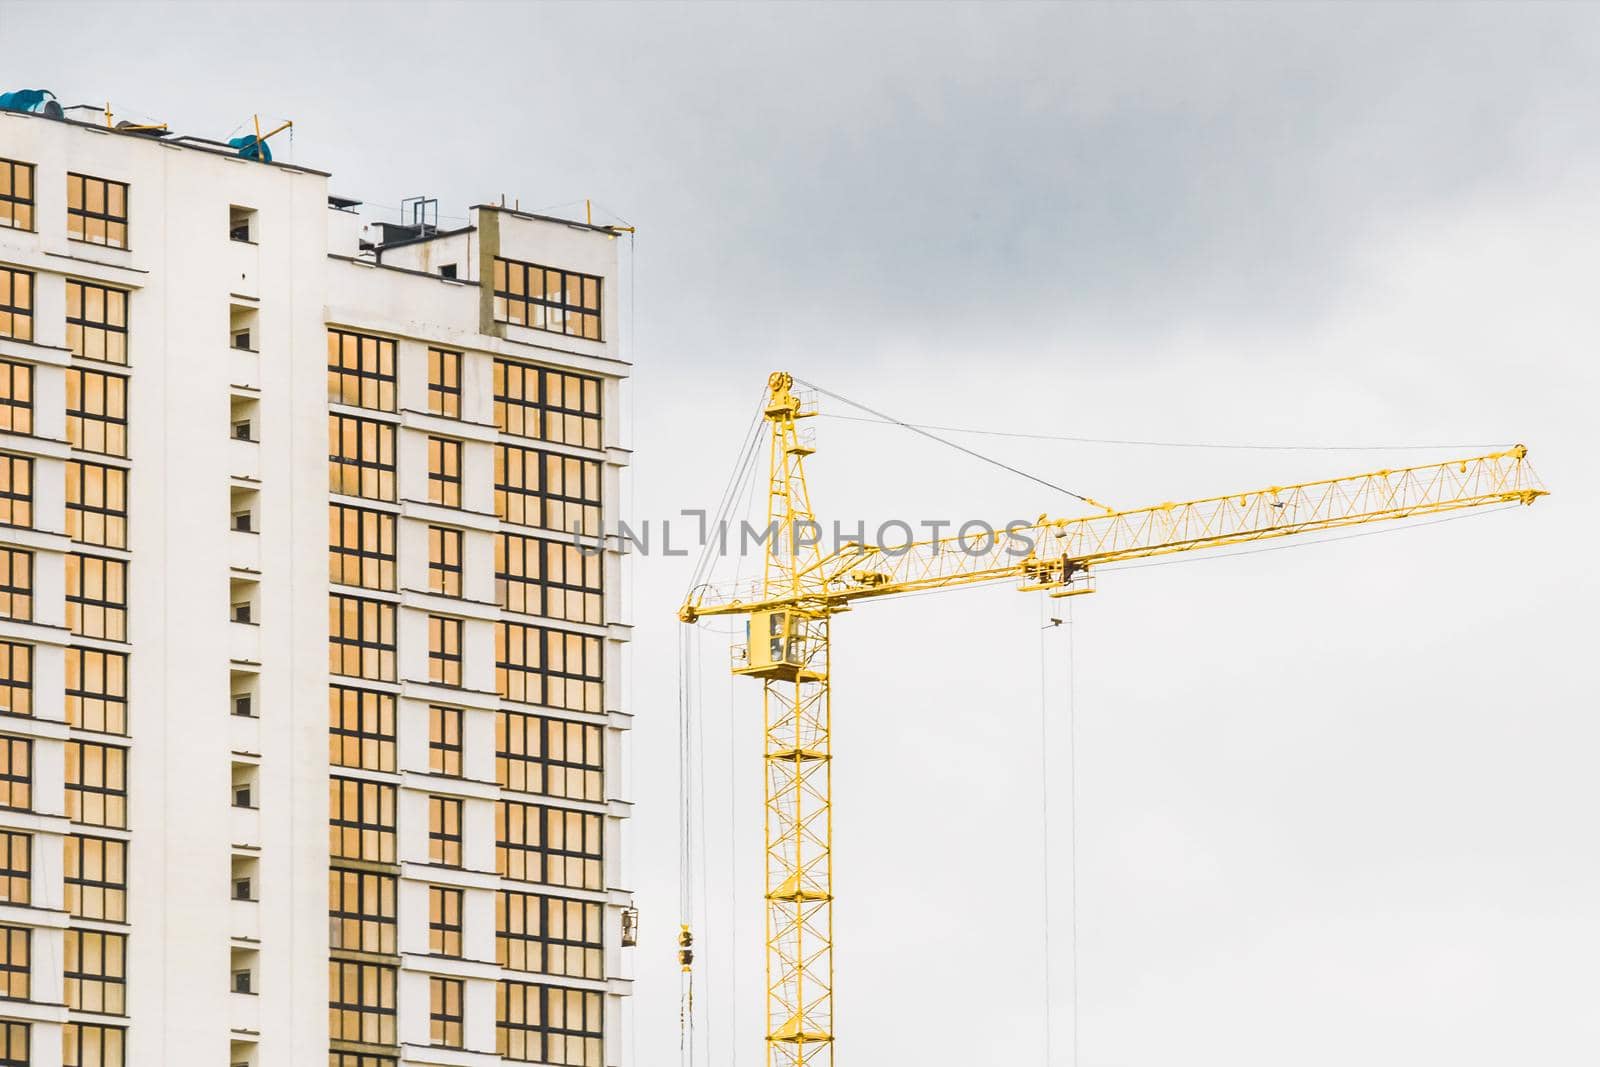 Industrial tower crane build a new modern city building on an construction site. Building development and work of urban architecture.